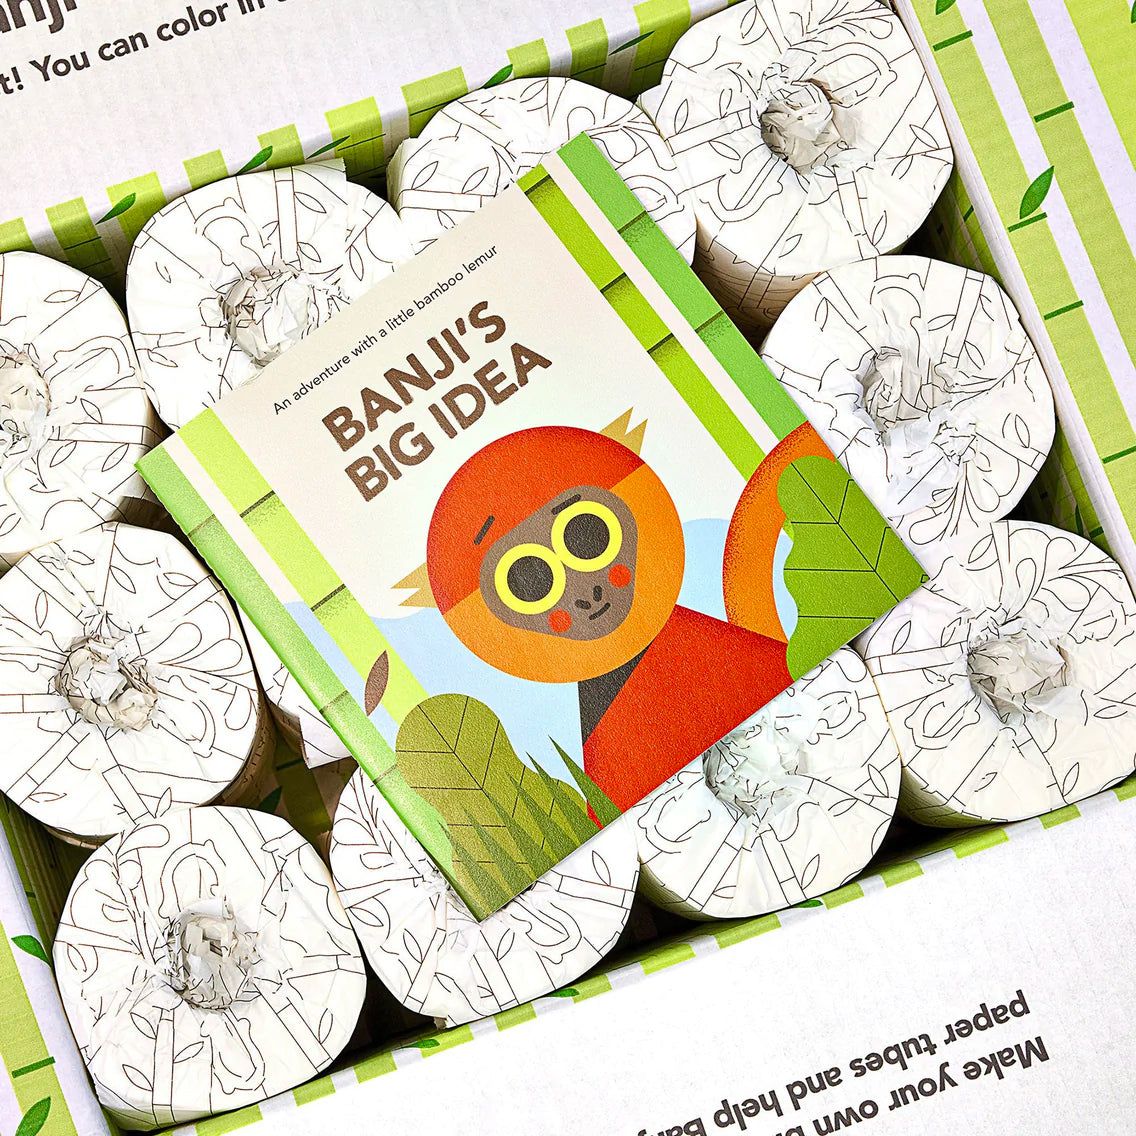 Banji's Big Idea storybook sitting on an open box of Reel recycled toilet paper wrapped in custom Little Lemur Kit paper